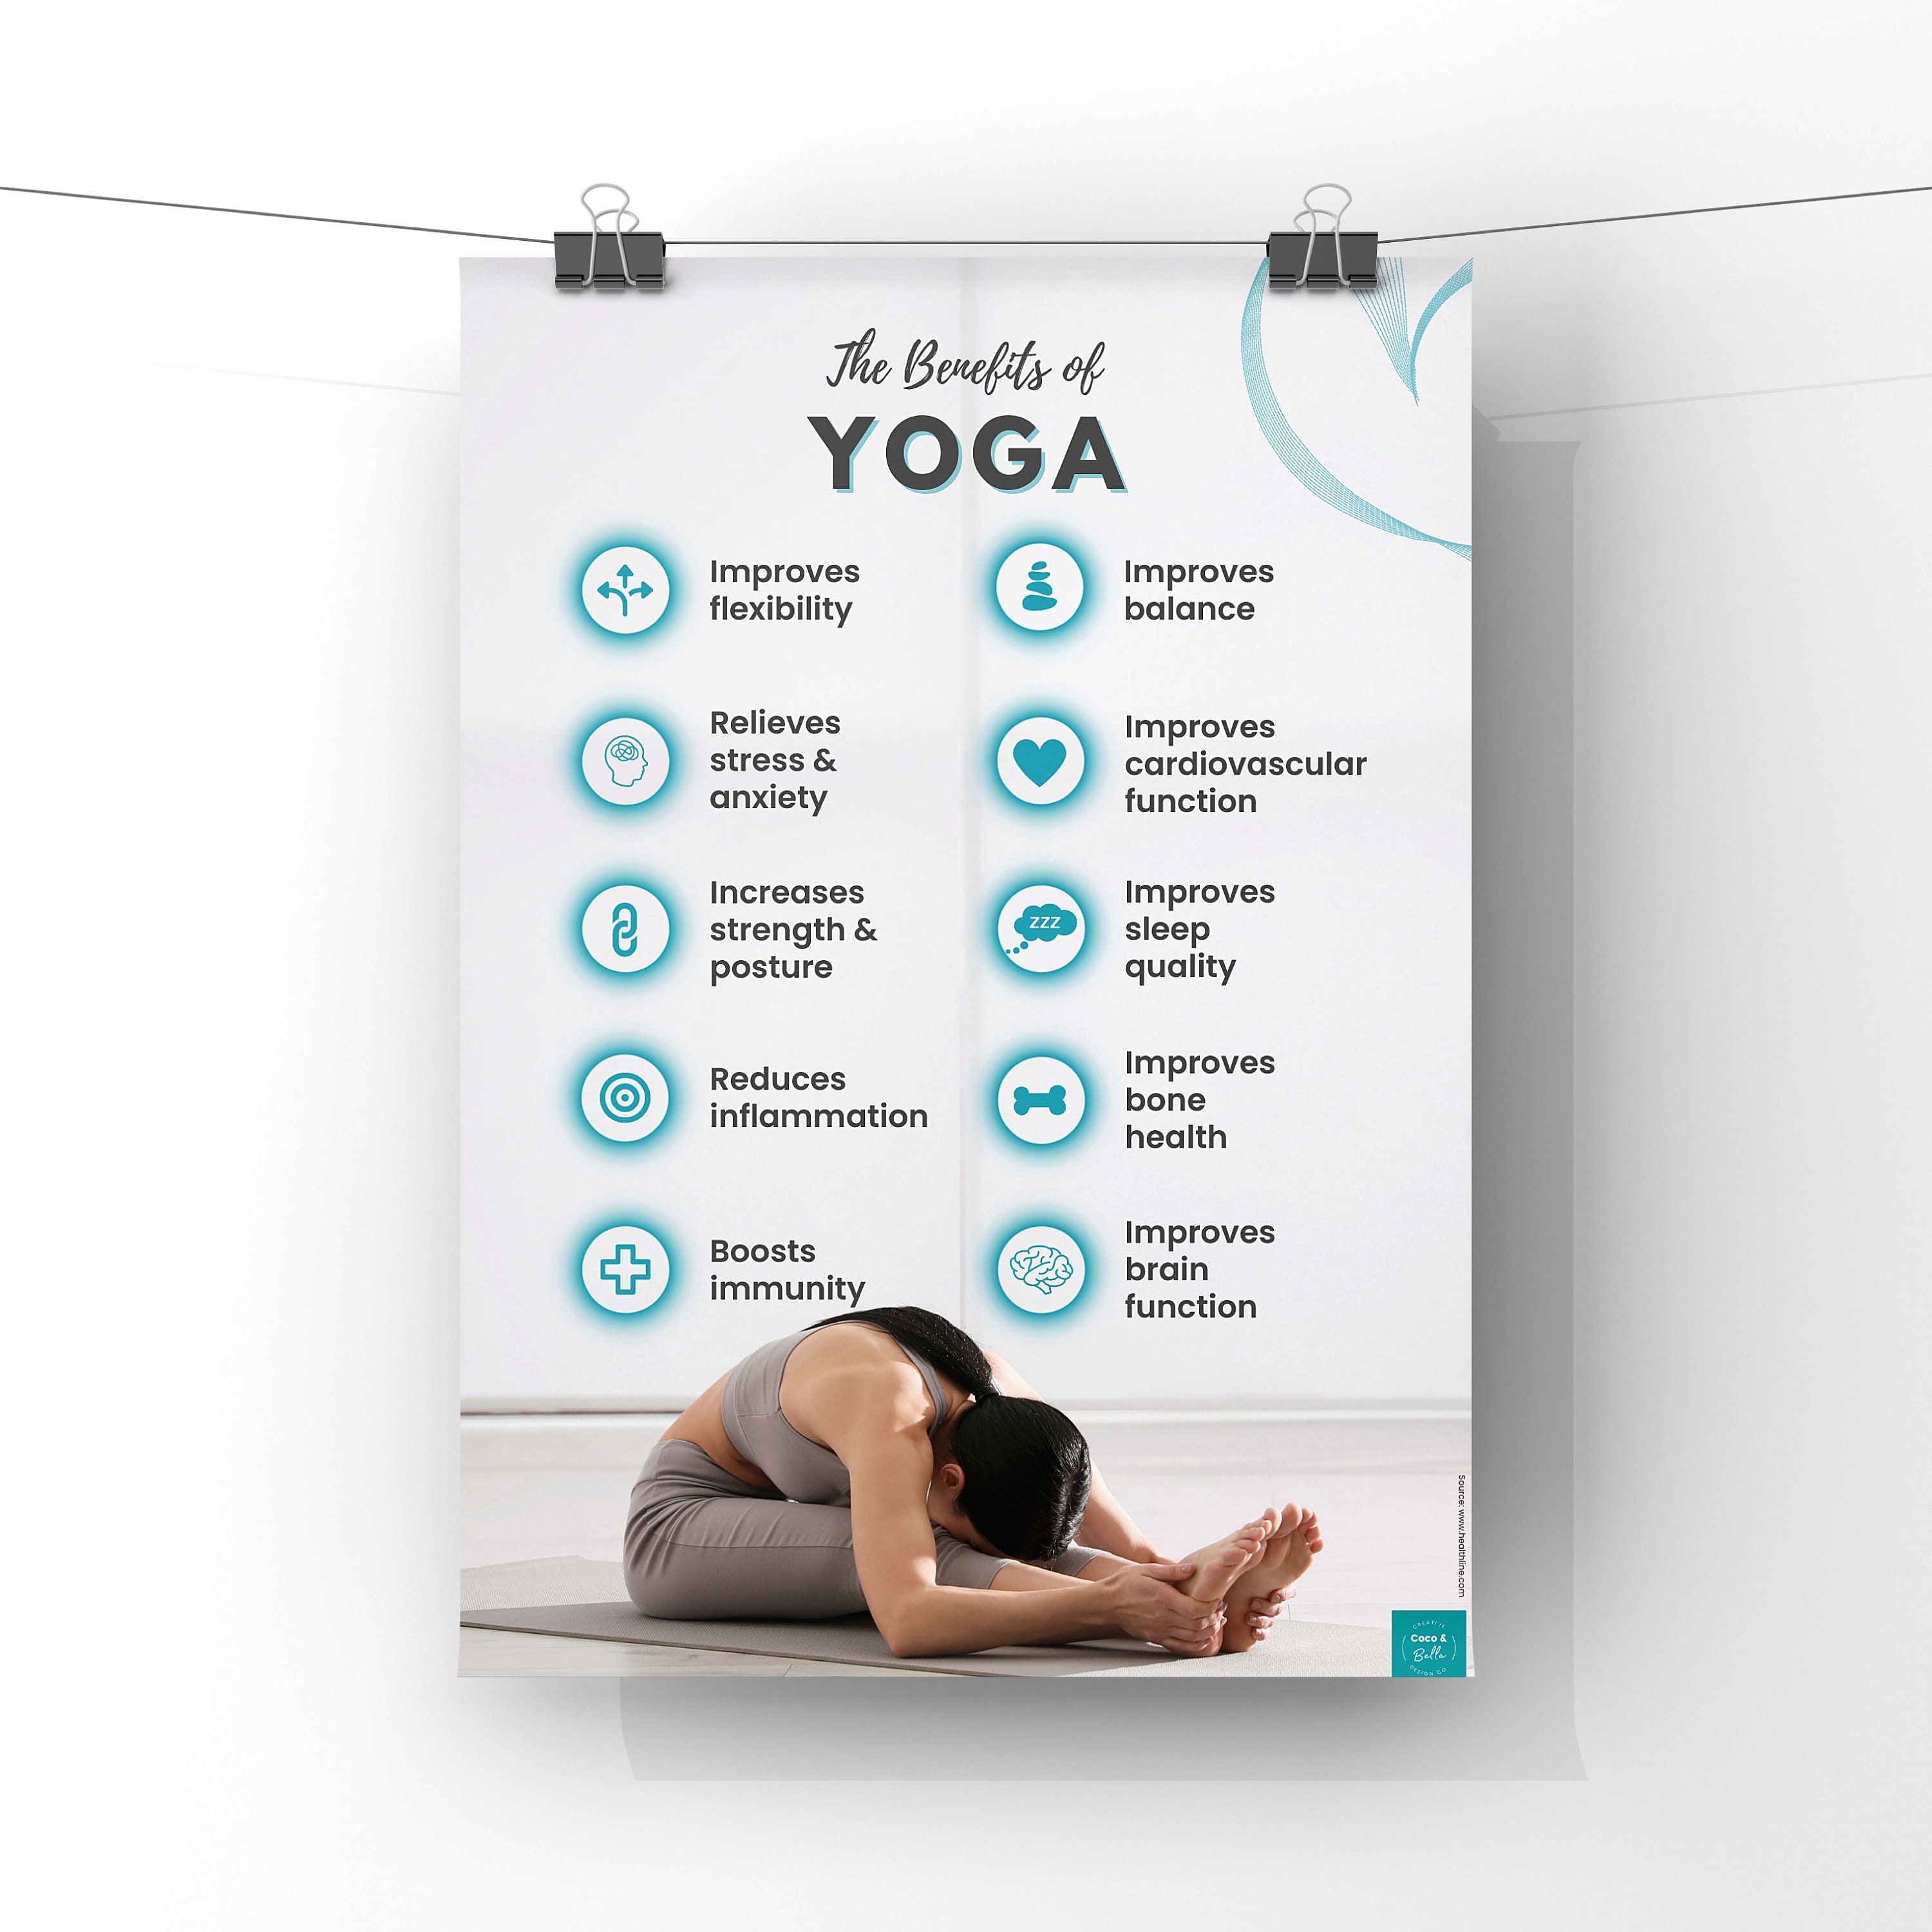 Benefits of Yoga Poster Health and Wellbeing Fitness Meditation